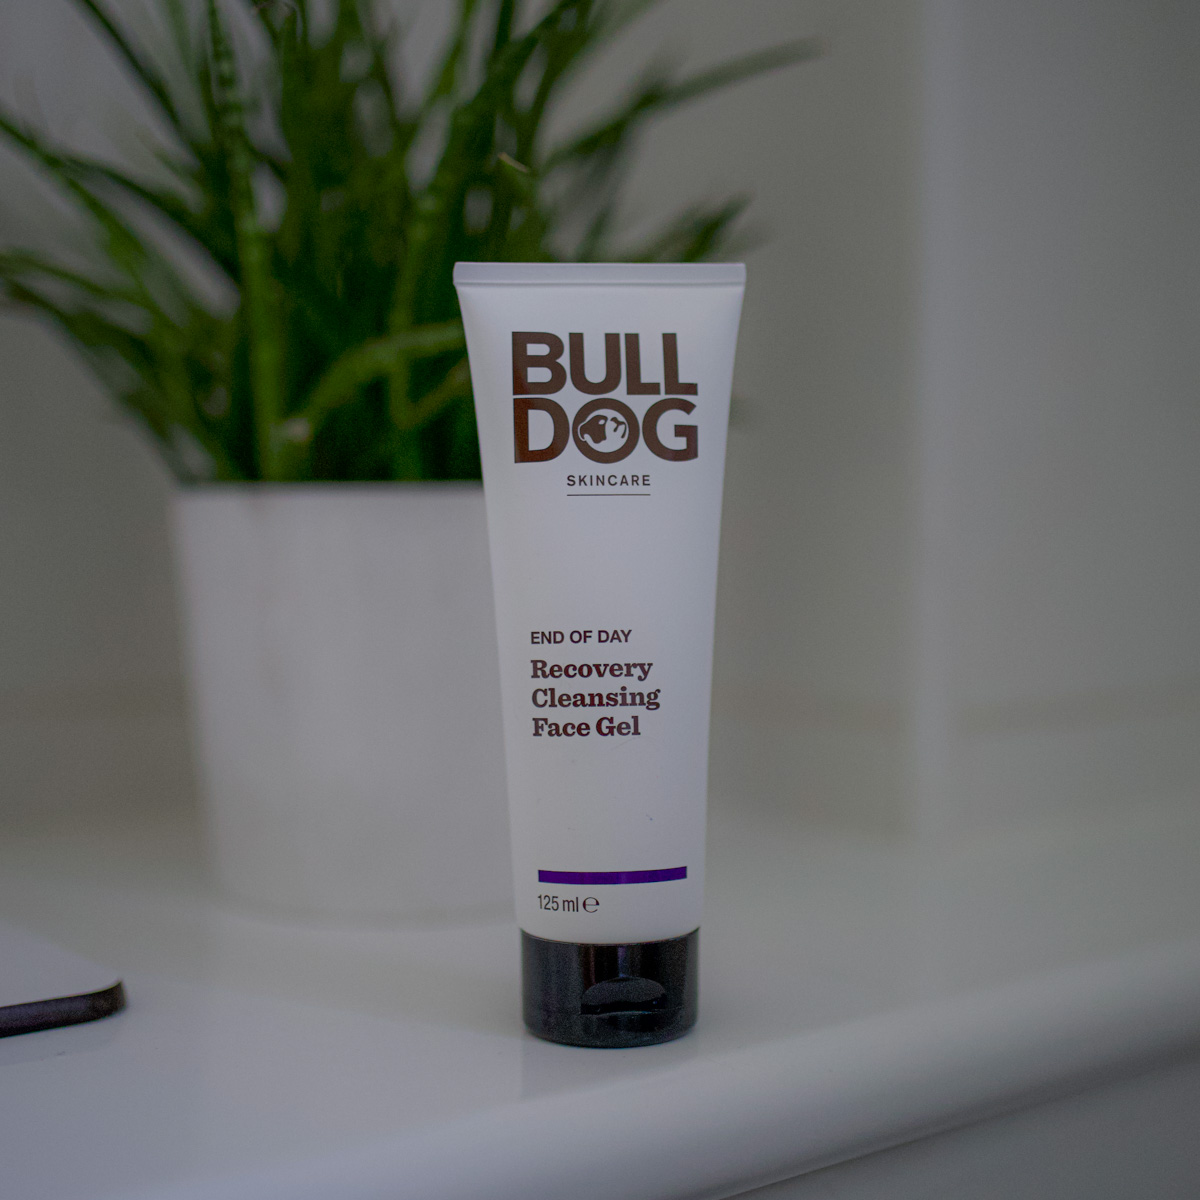 bulldog-skincare-advanced-skincare-range-end-of-day-man-recovery-cleansing-face-gel-man-for-himself-1.jpg